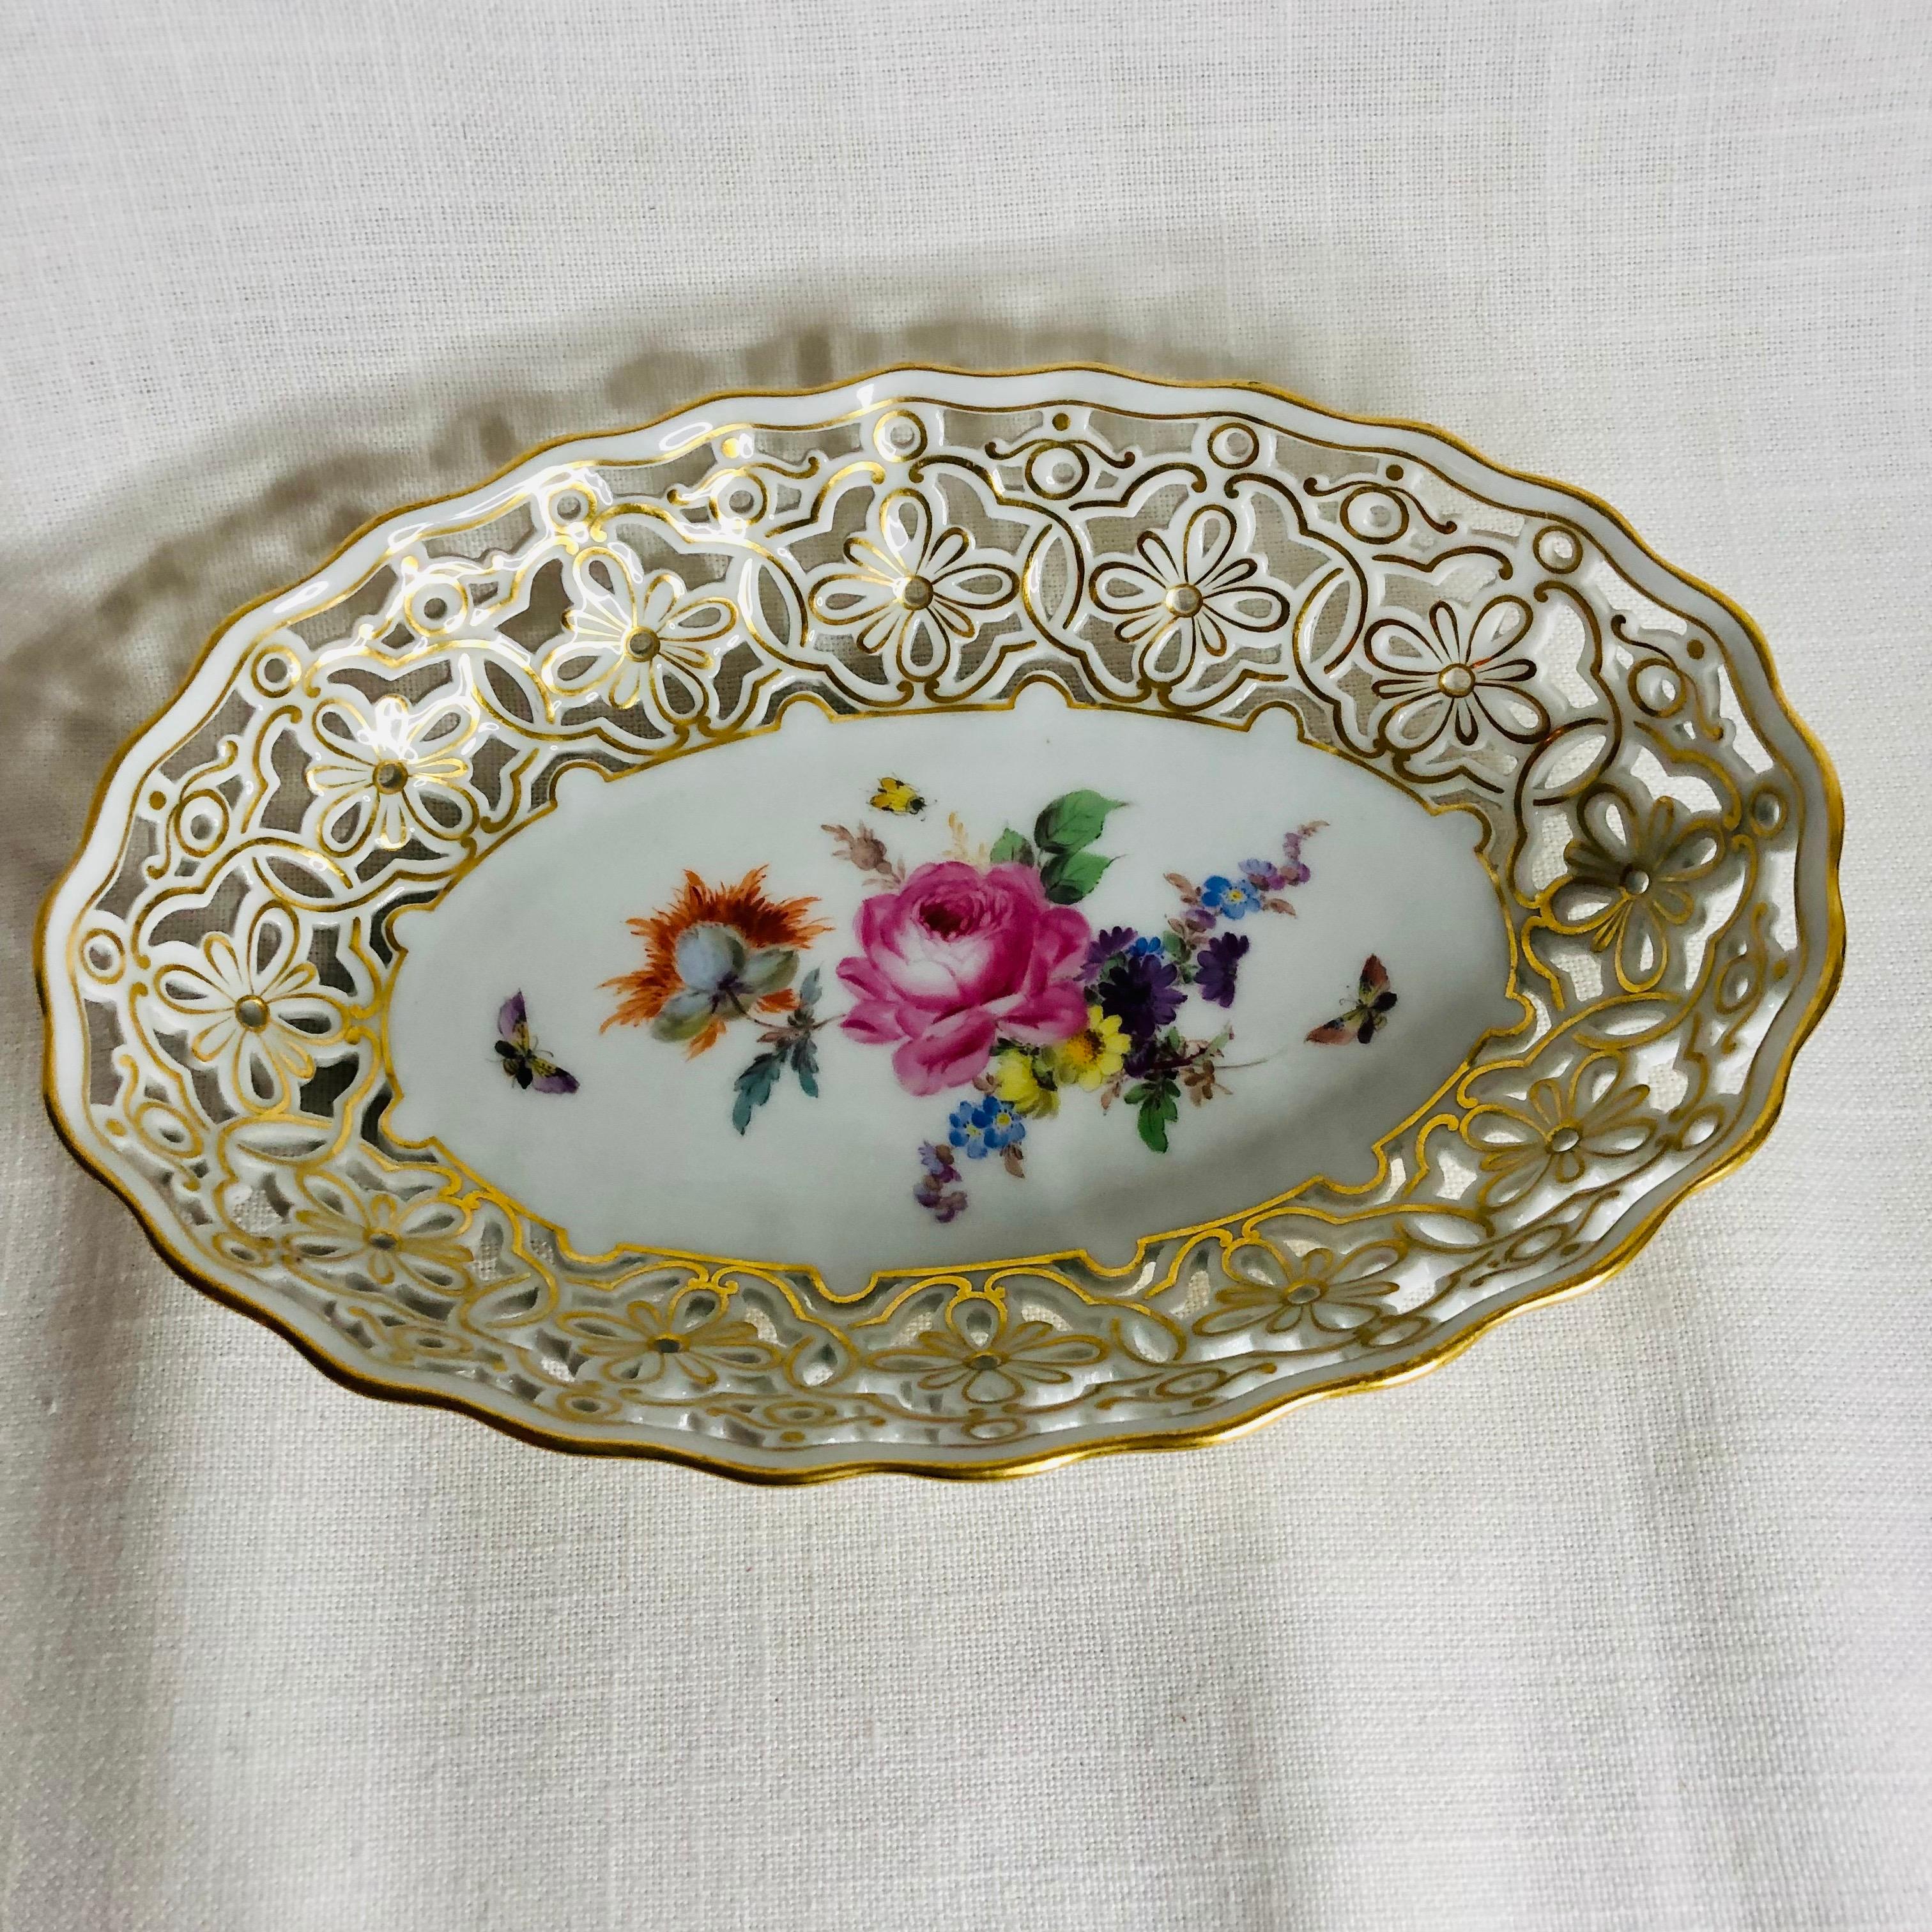 Hand-Painted Meissen Reticulated Bowl With Flower Bouquet & Accents of Butterflies & Insects For Sale